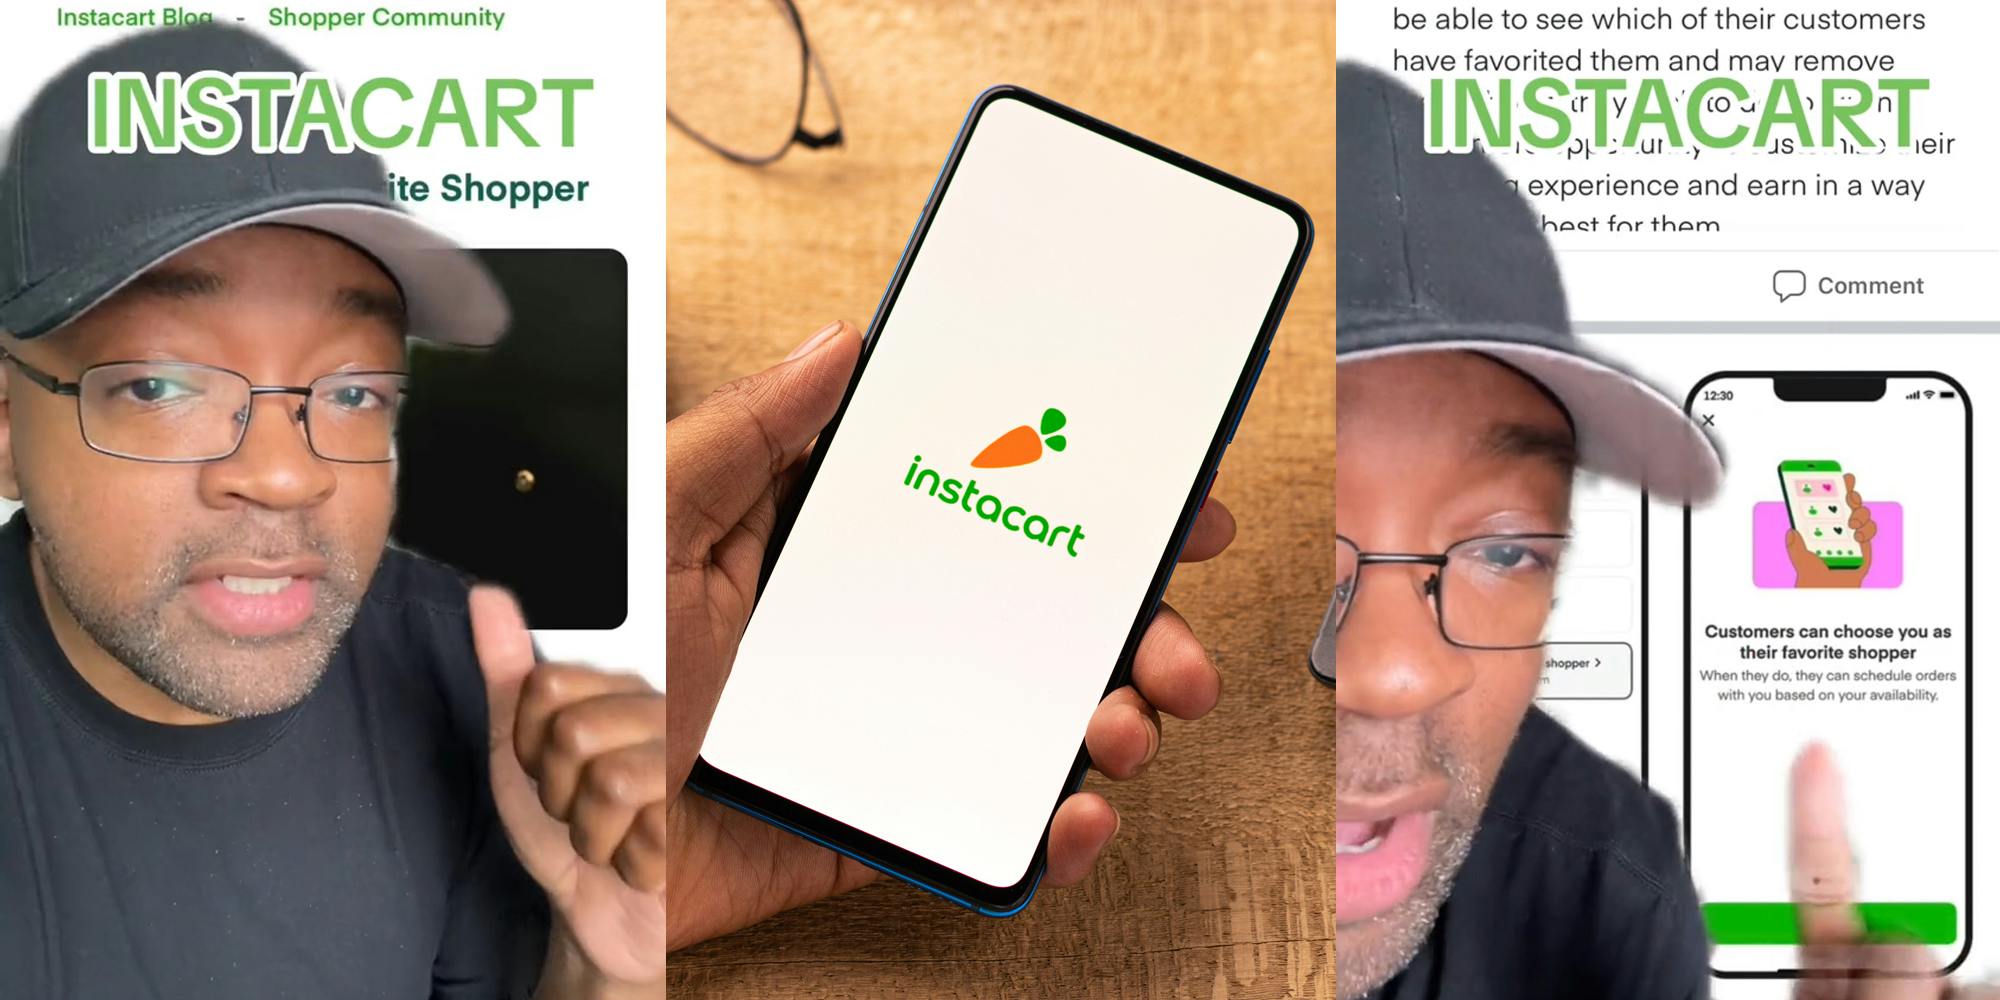 man greenscreen TikTok over Instacart Preferred Shopper program with caption "INSTACART" (l) hand holding phone with Instacart on screen in front of tan background (c) man greenscreen TikTok over Instacart Preferred Shopper program with caption "INSTACART" (r)